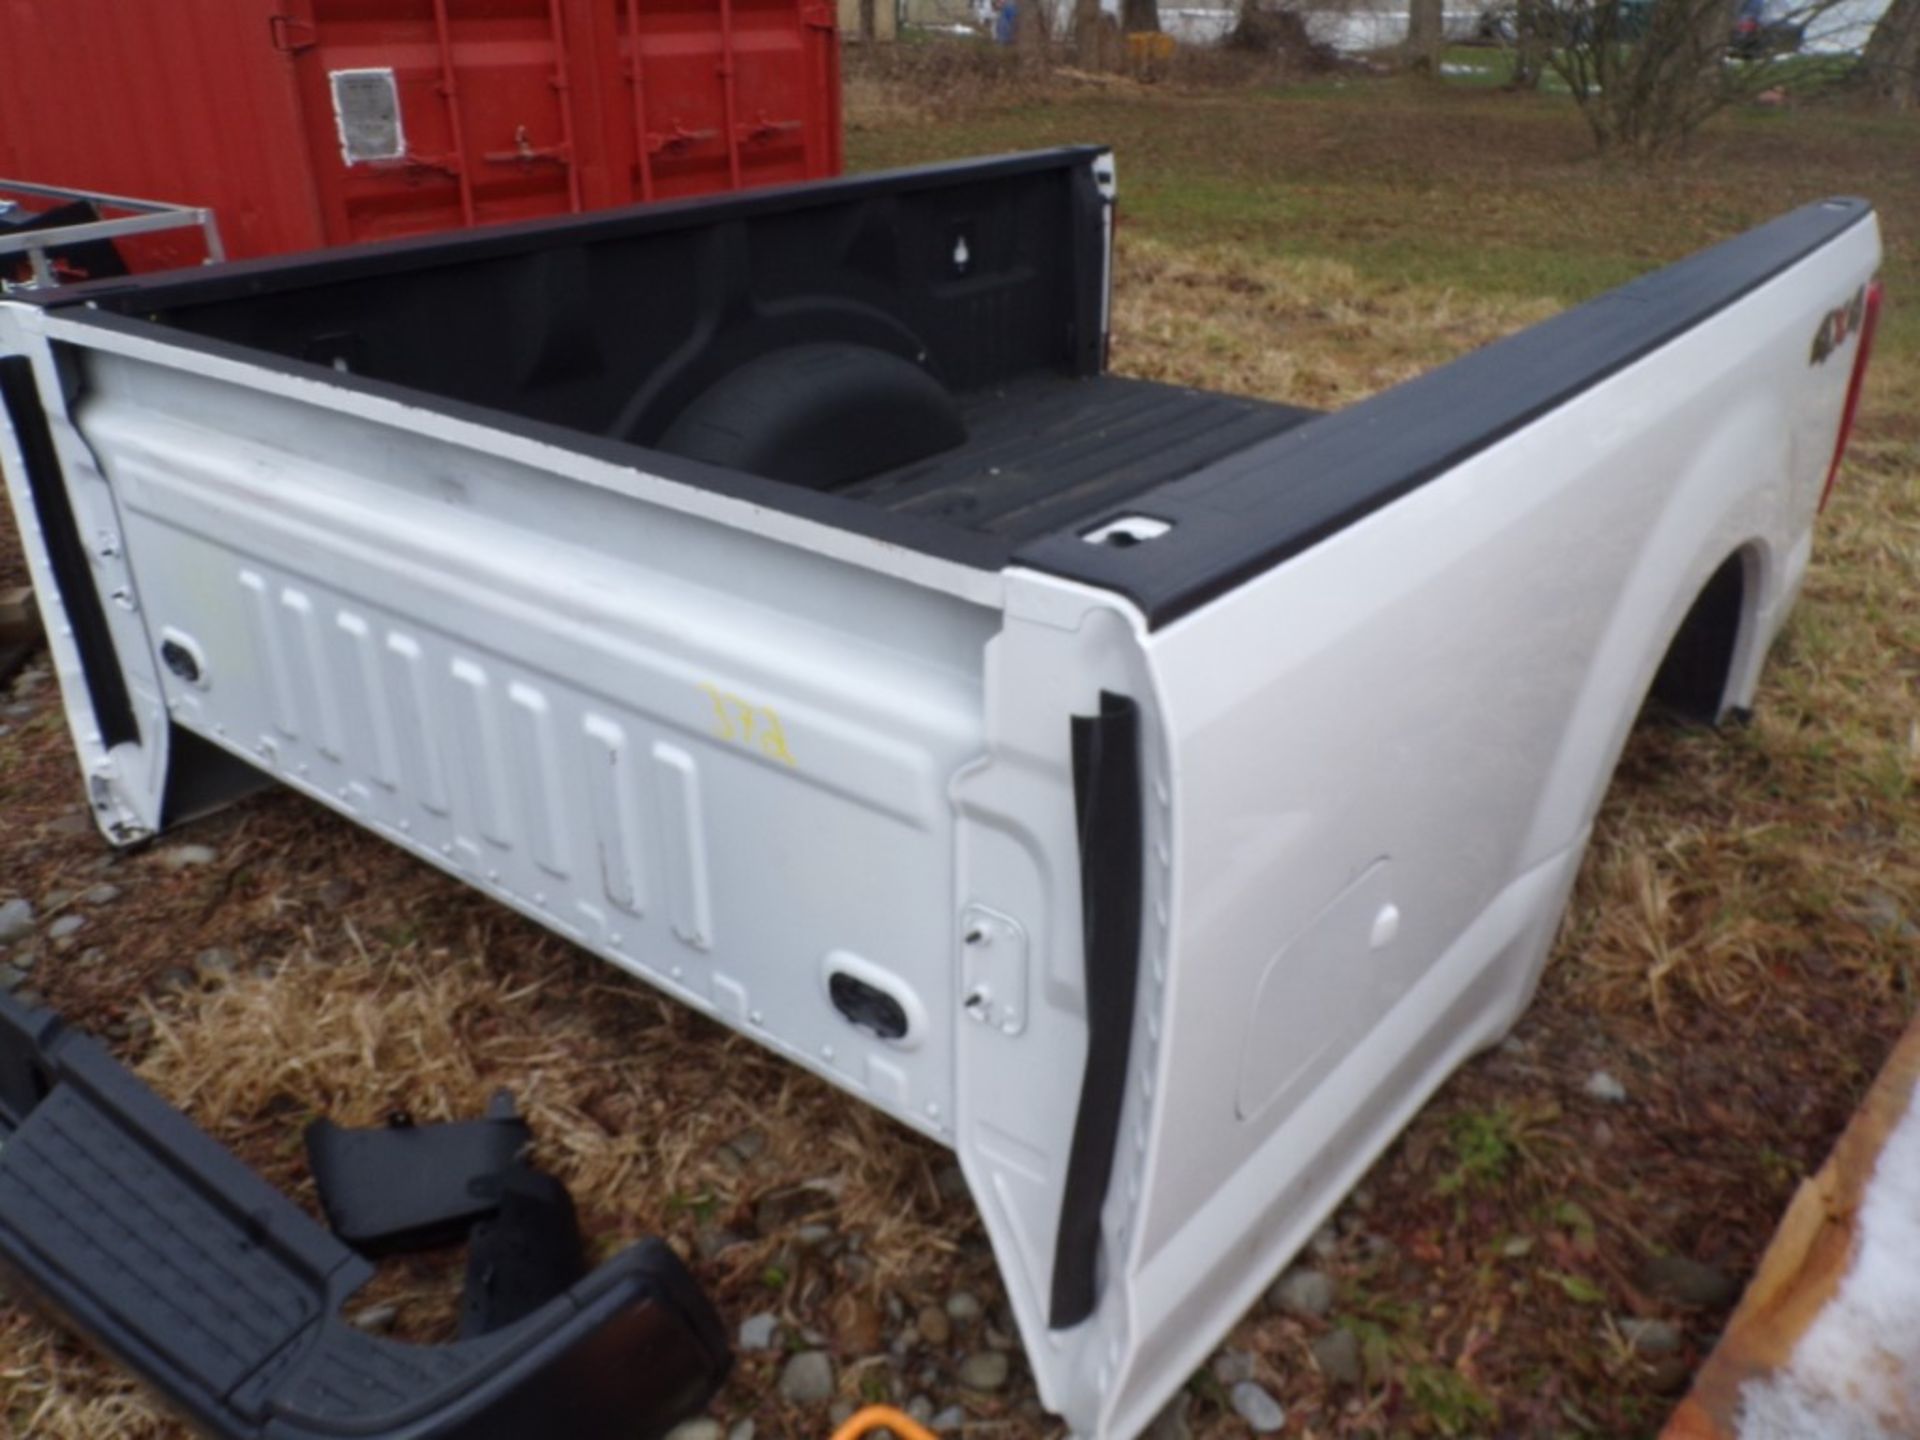 8' Ford Super Duty Truck Box, White, w/Spray-In Liner, No Tailgate And Damage To Passenger Wheel